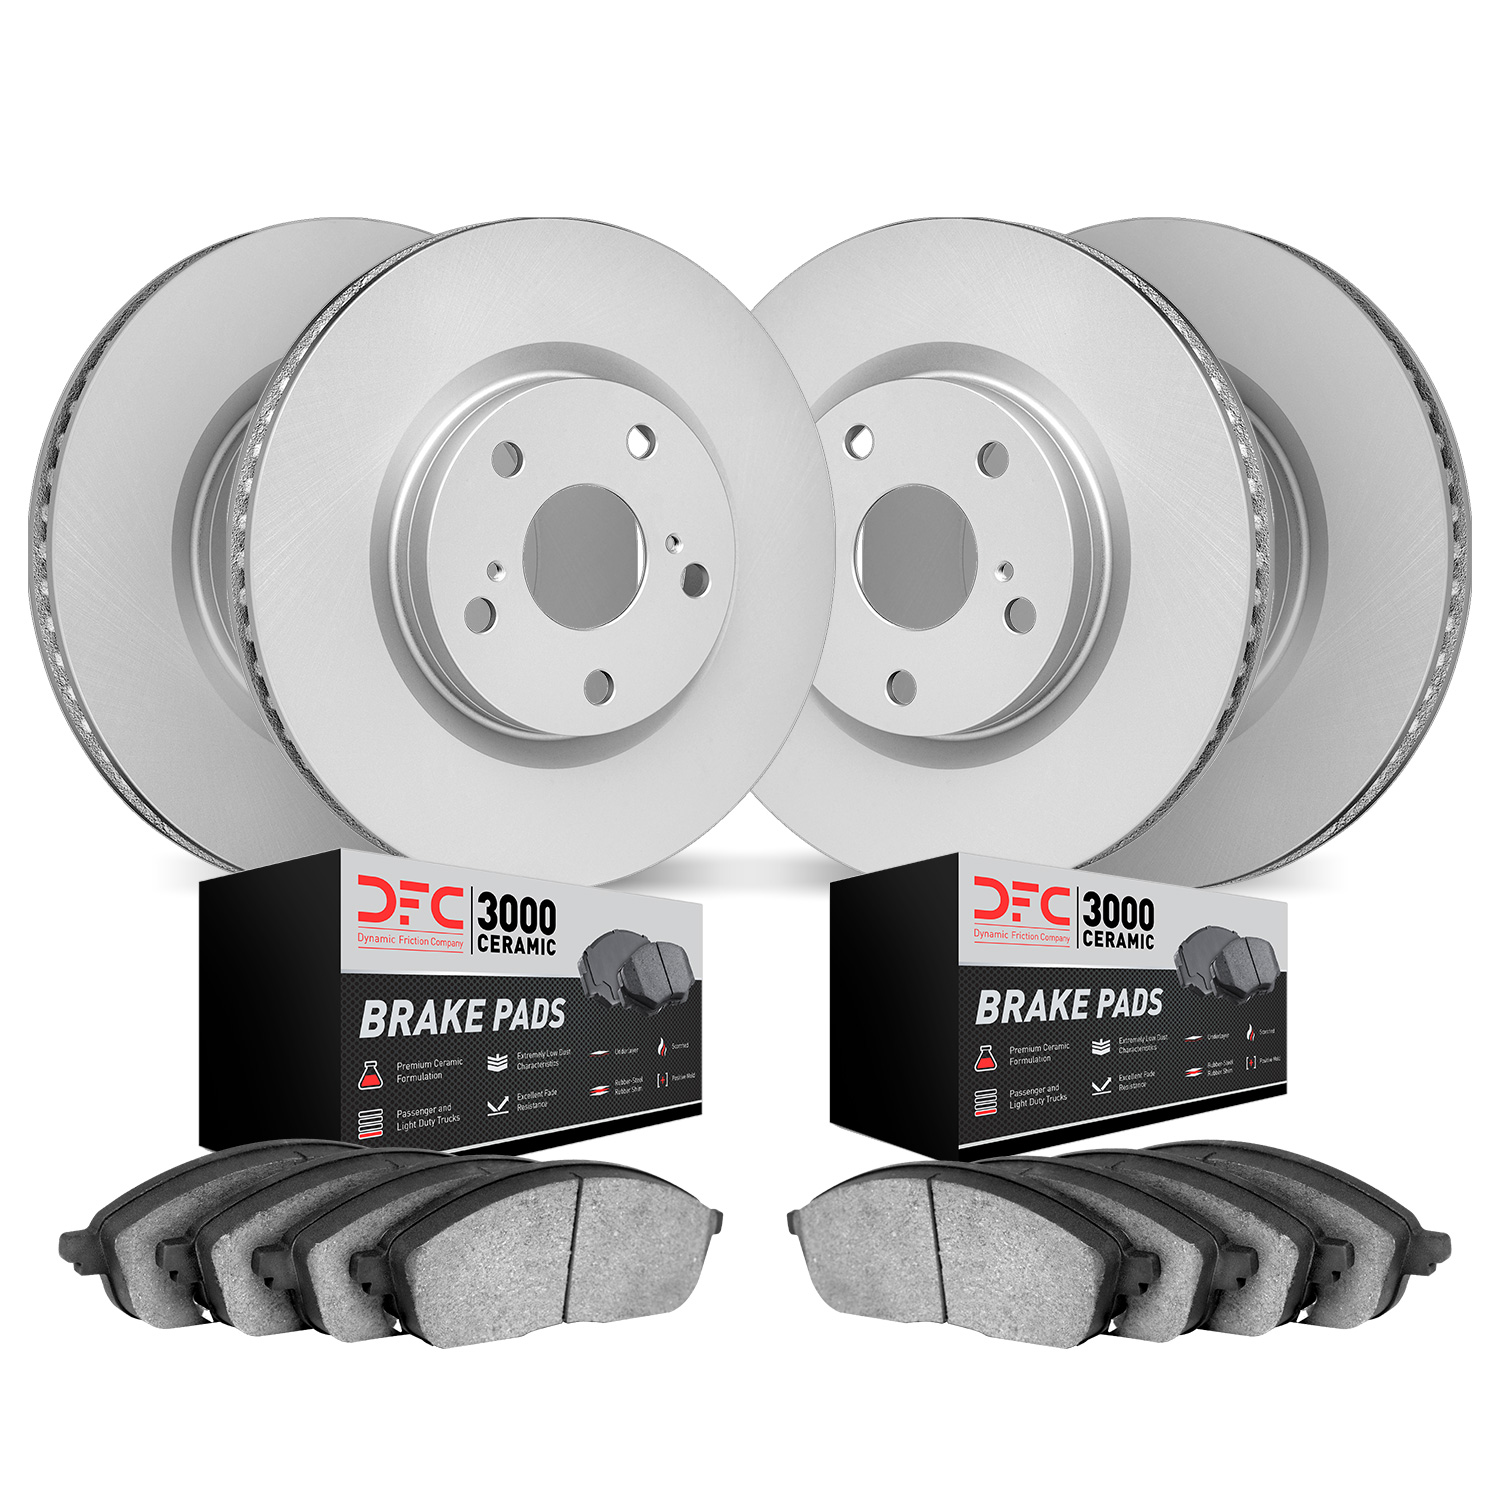 4304-67046 Geospec Brake Rotors with 3000-Series Ceramic Brake Pads Kit, 2014-2019 Infiniti/Nissan, Position: Front and Rear